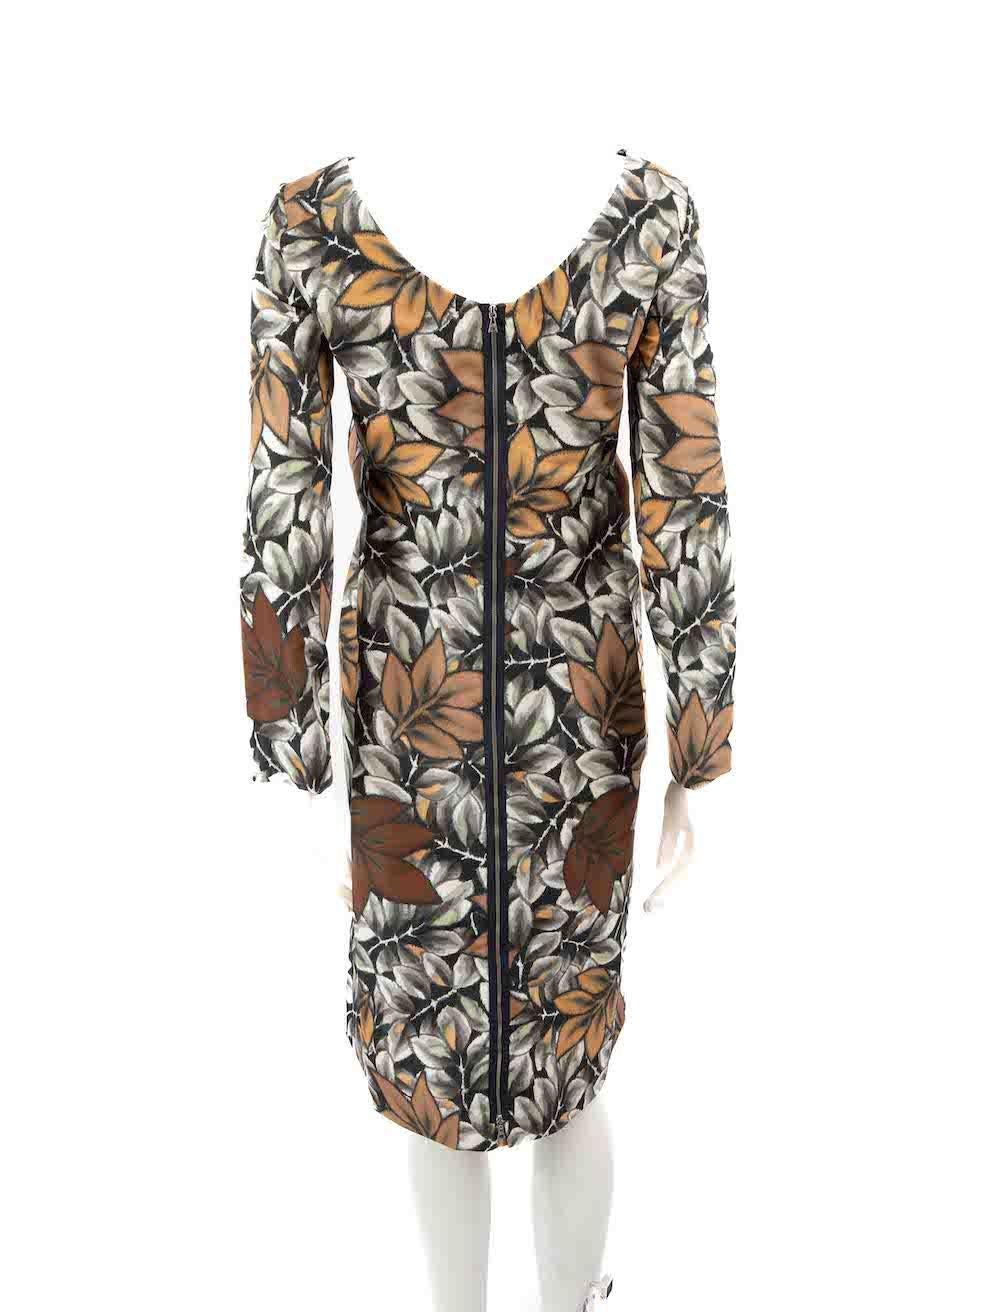 Marni Leaf Pattern Knee Length Dress Size S In Good Condition For Sale In London, GB